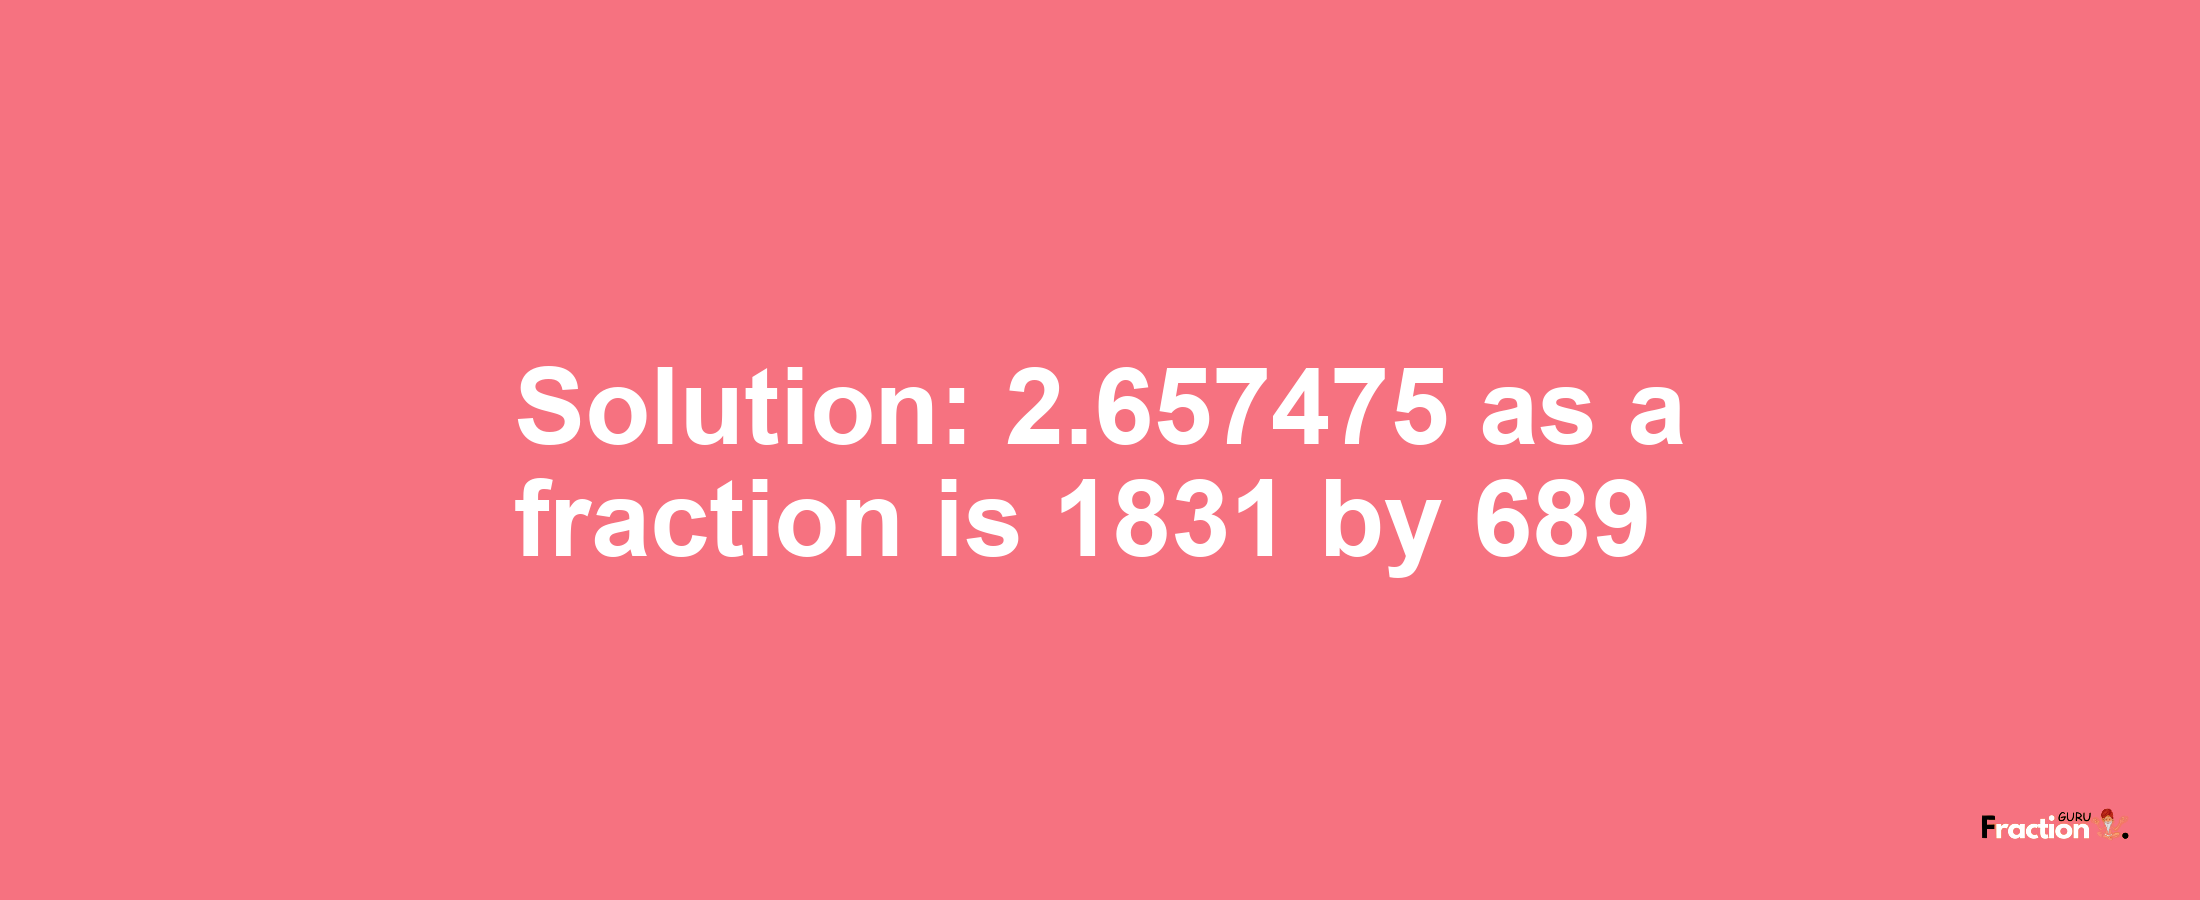 Solution:2.657475 as a fraction is 1831/689